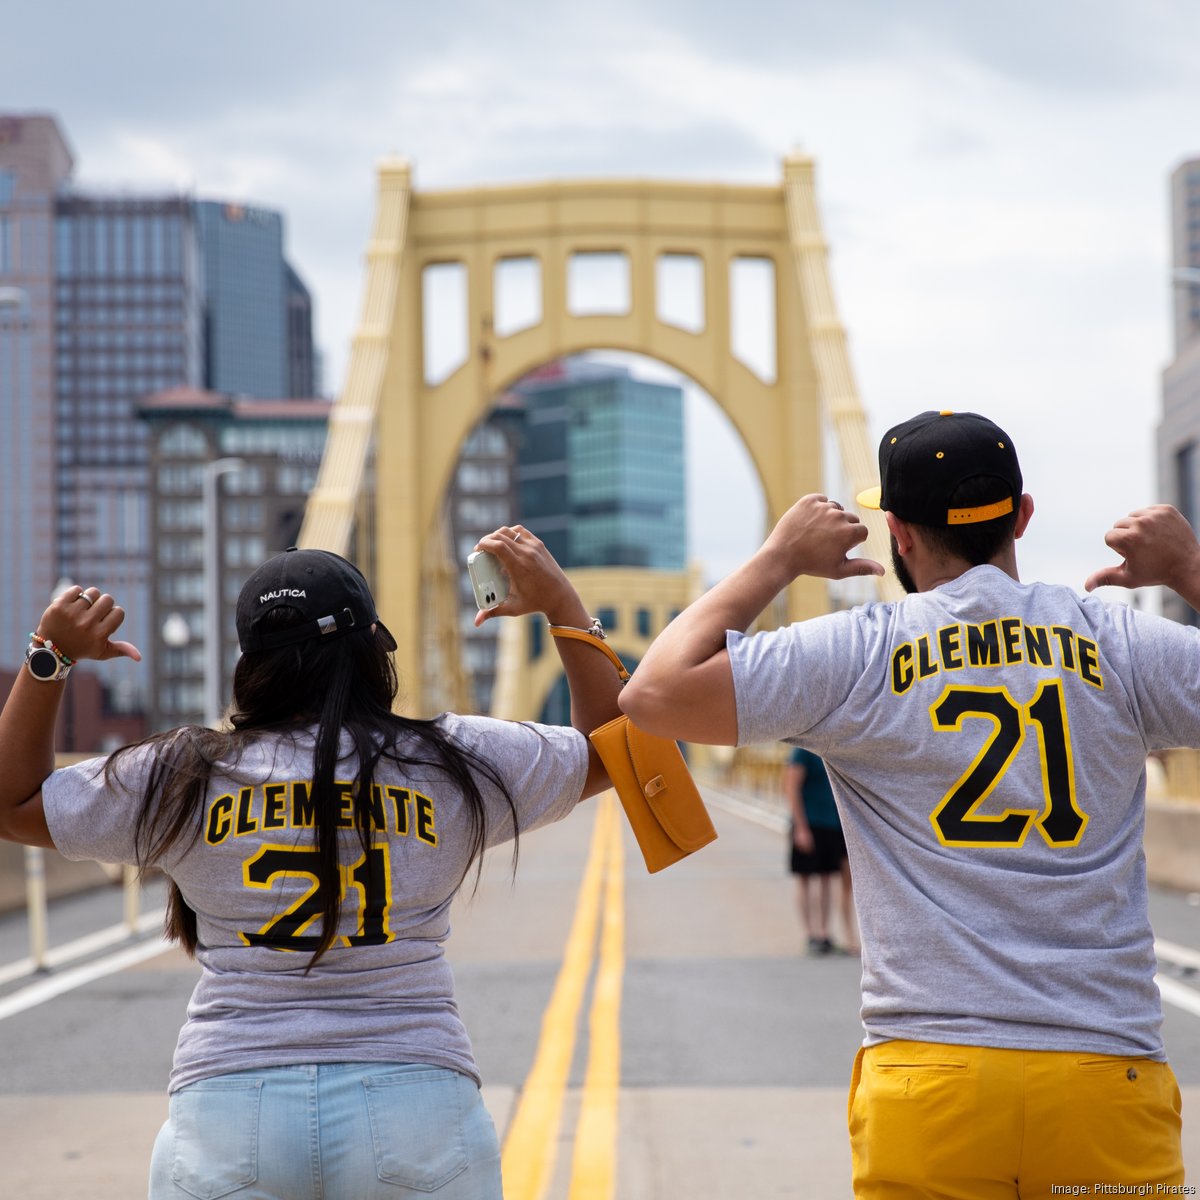 Pittsburgh Pirates fans are thrilled as the team topped the St